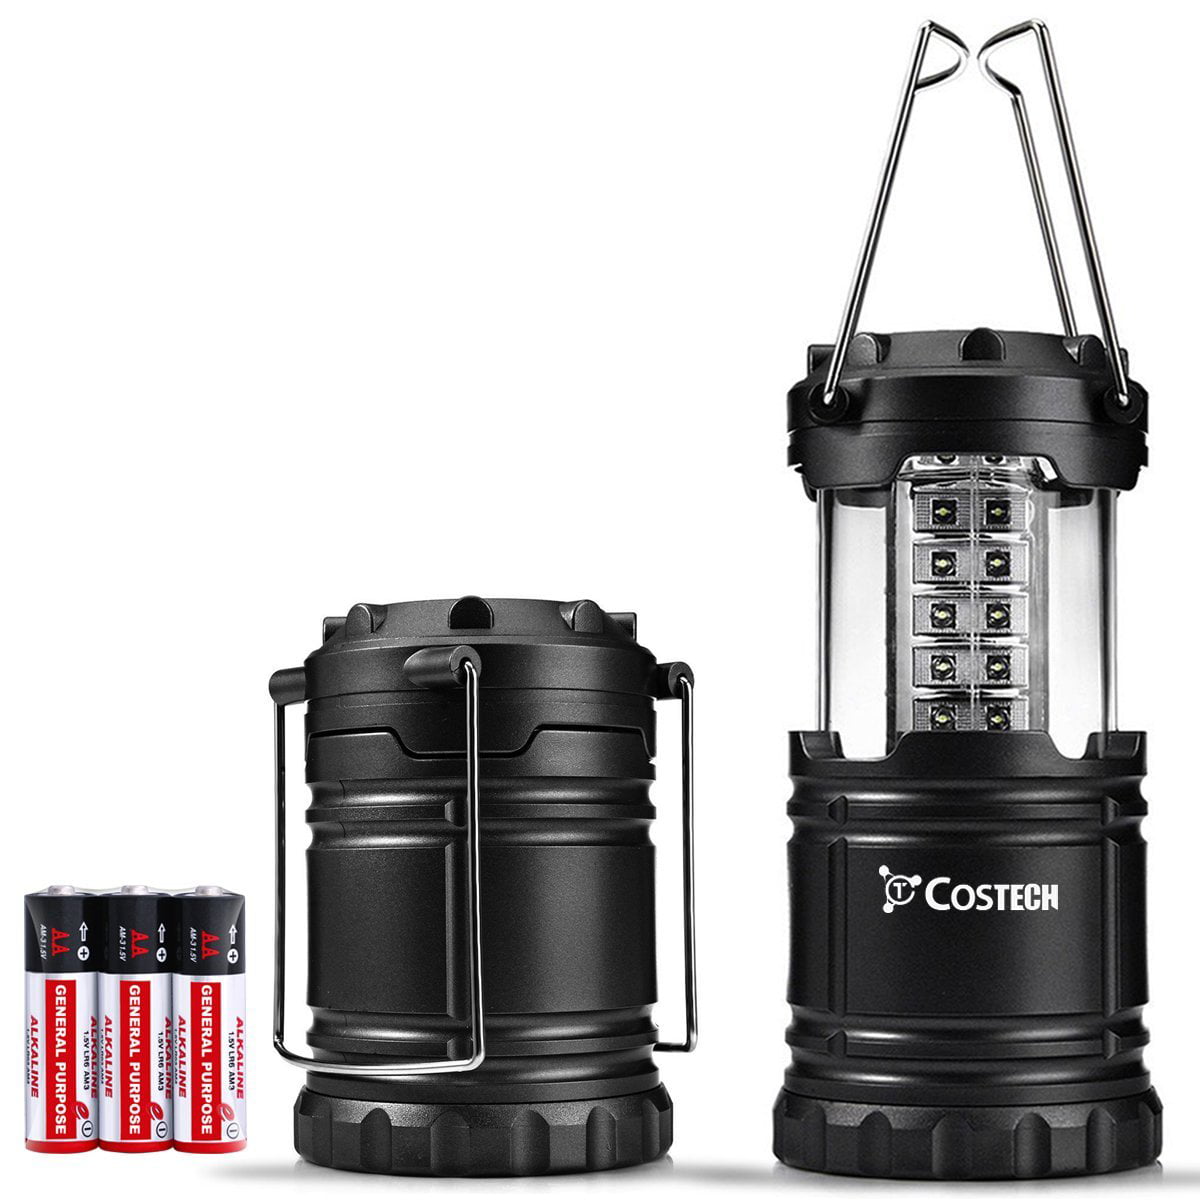 30 LED Portable Camping Torch Hiking Lantern Super Bright Hanging Outdoor Lamp 